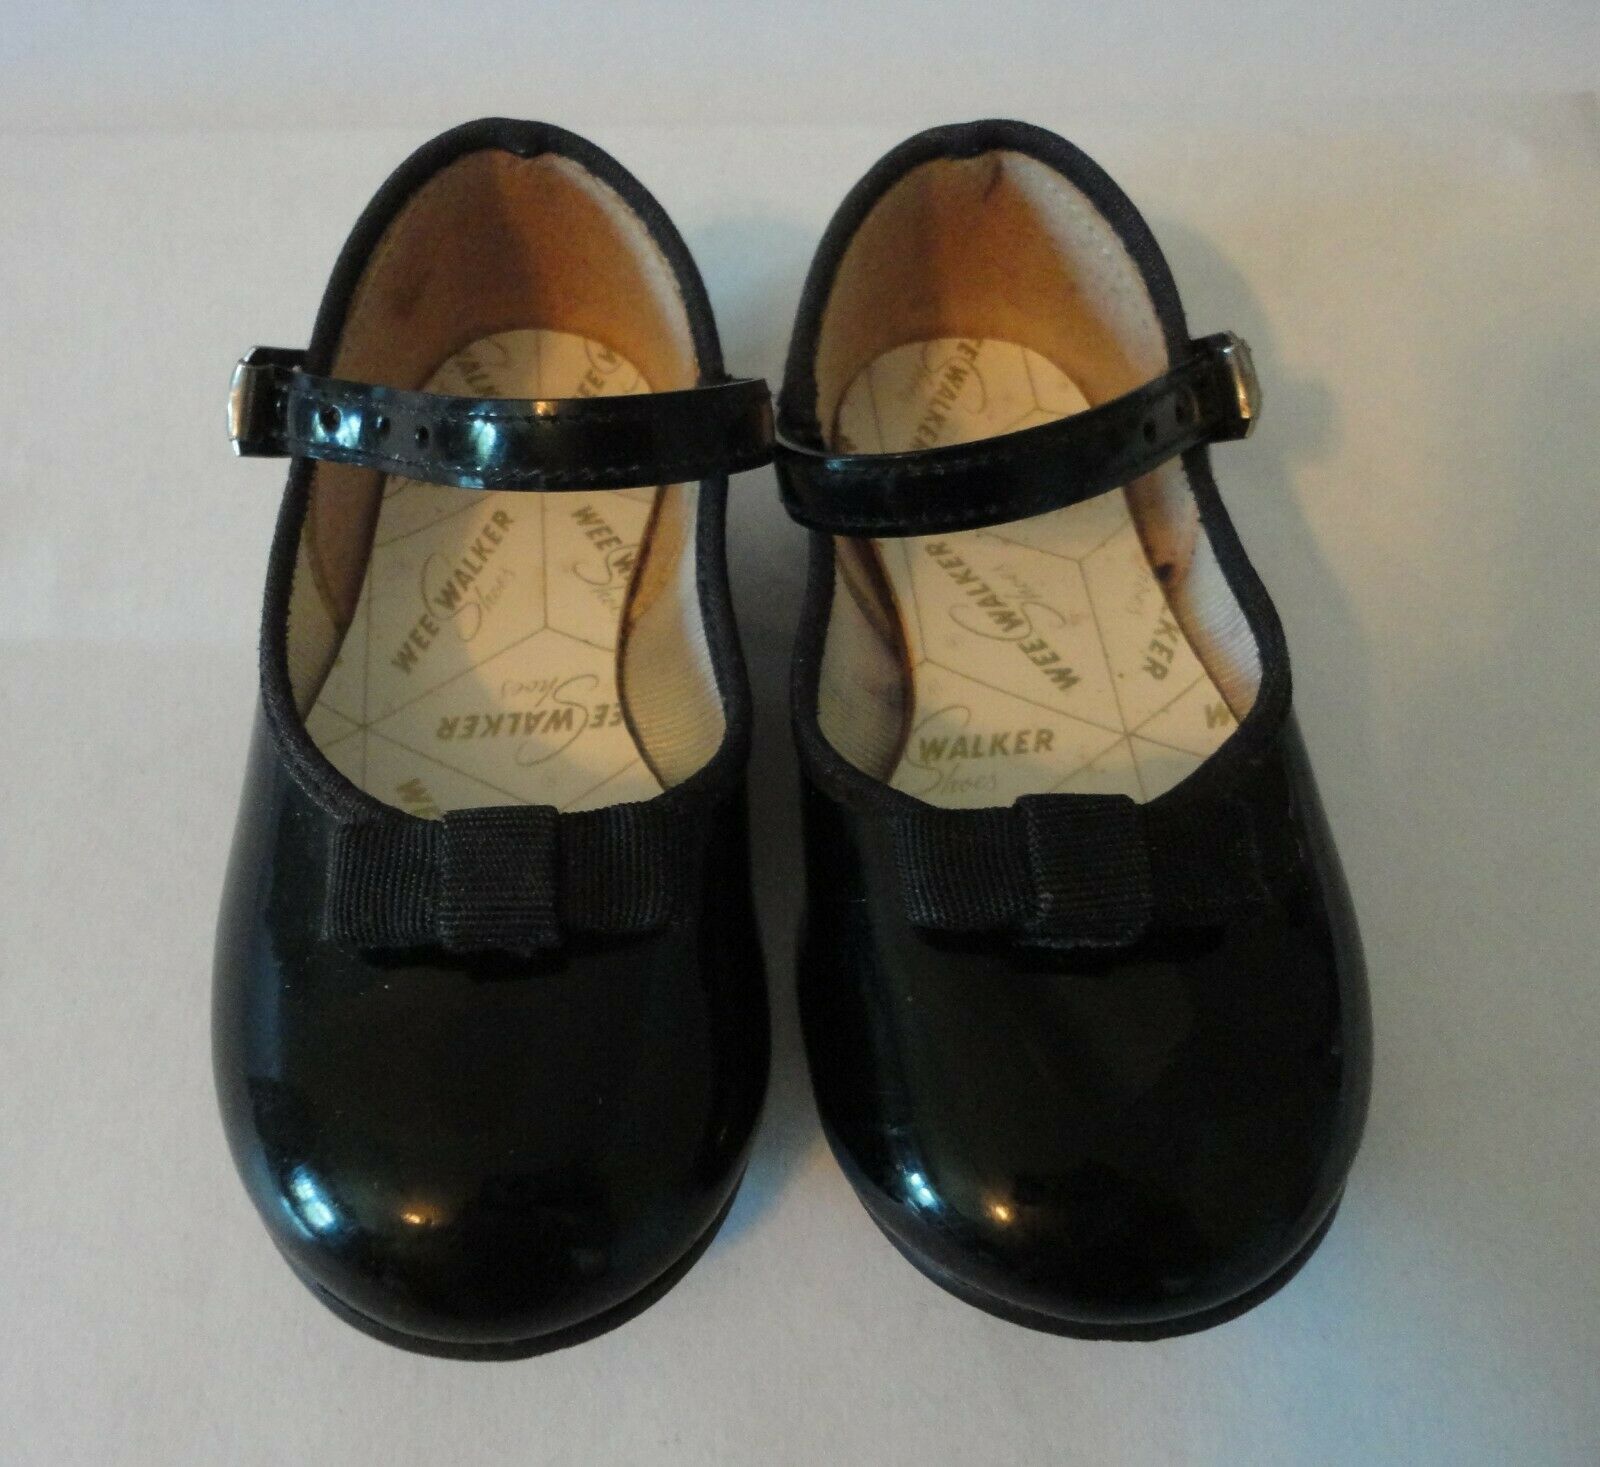 Vintage Wee Walker Baby Shoes Black Shiny Leather Strap Bow No Size Inside Read